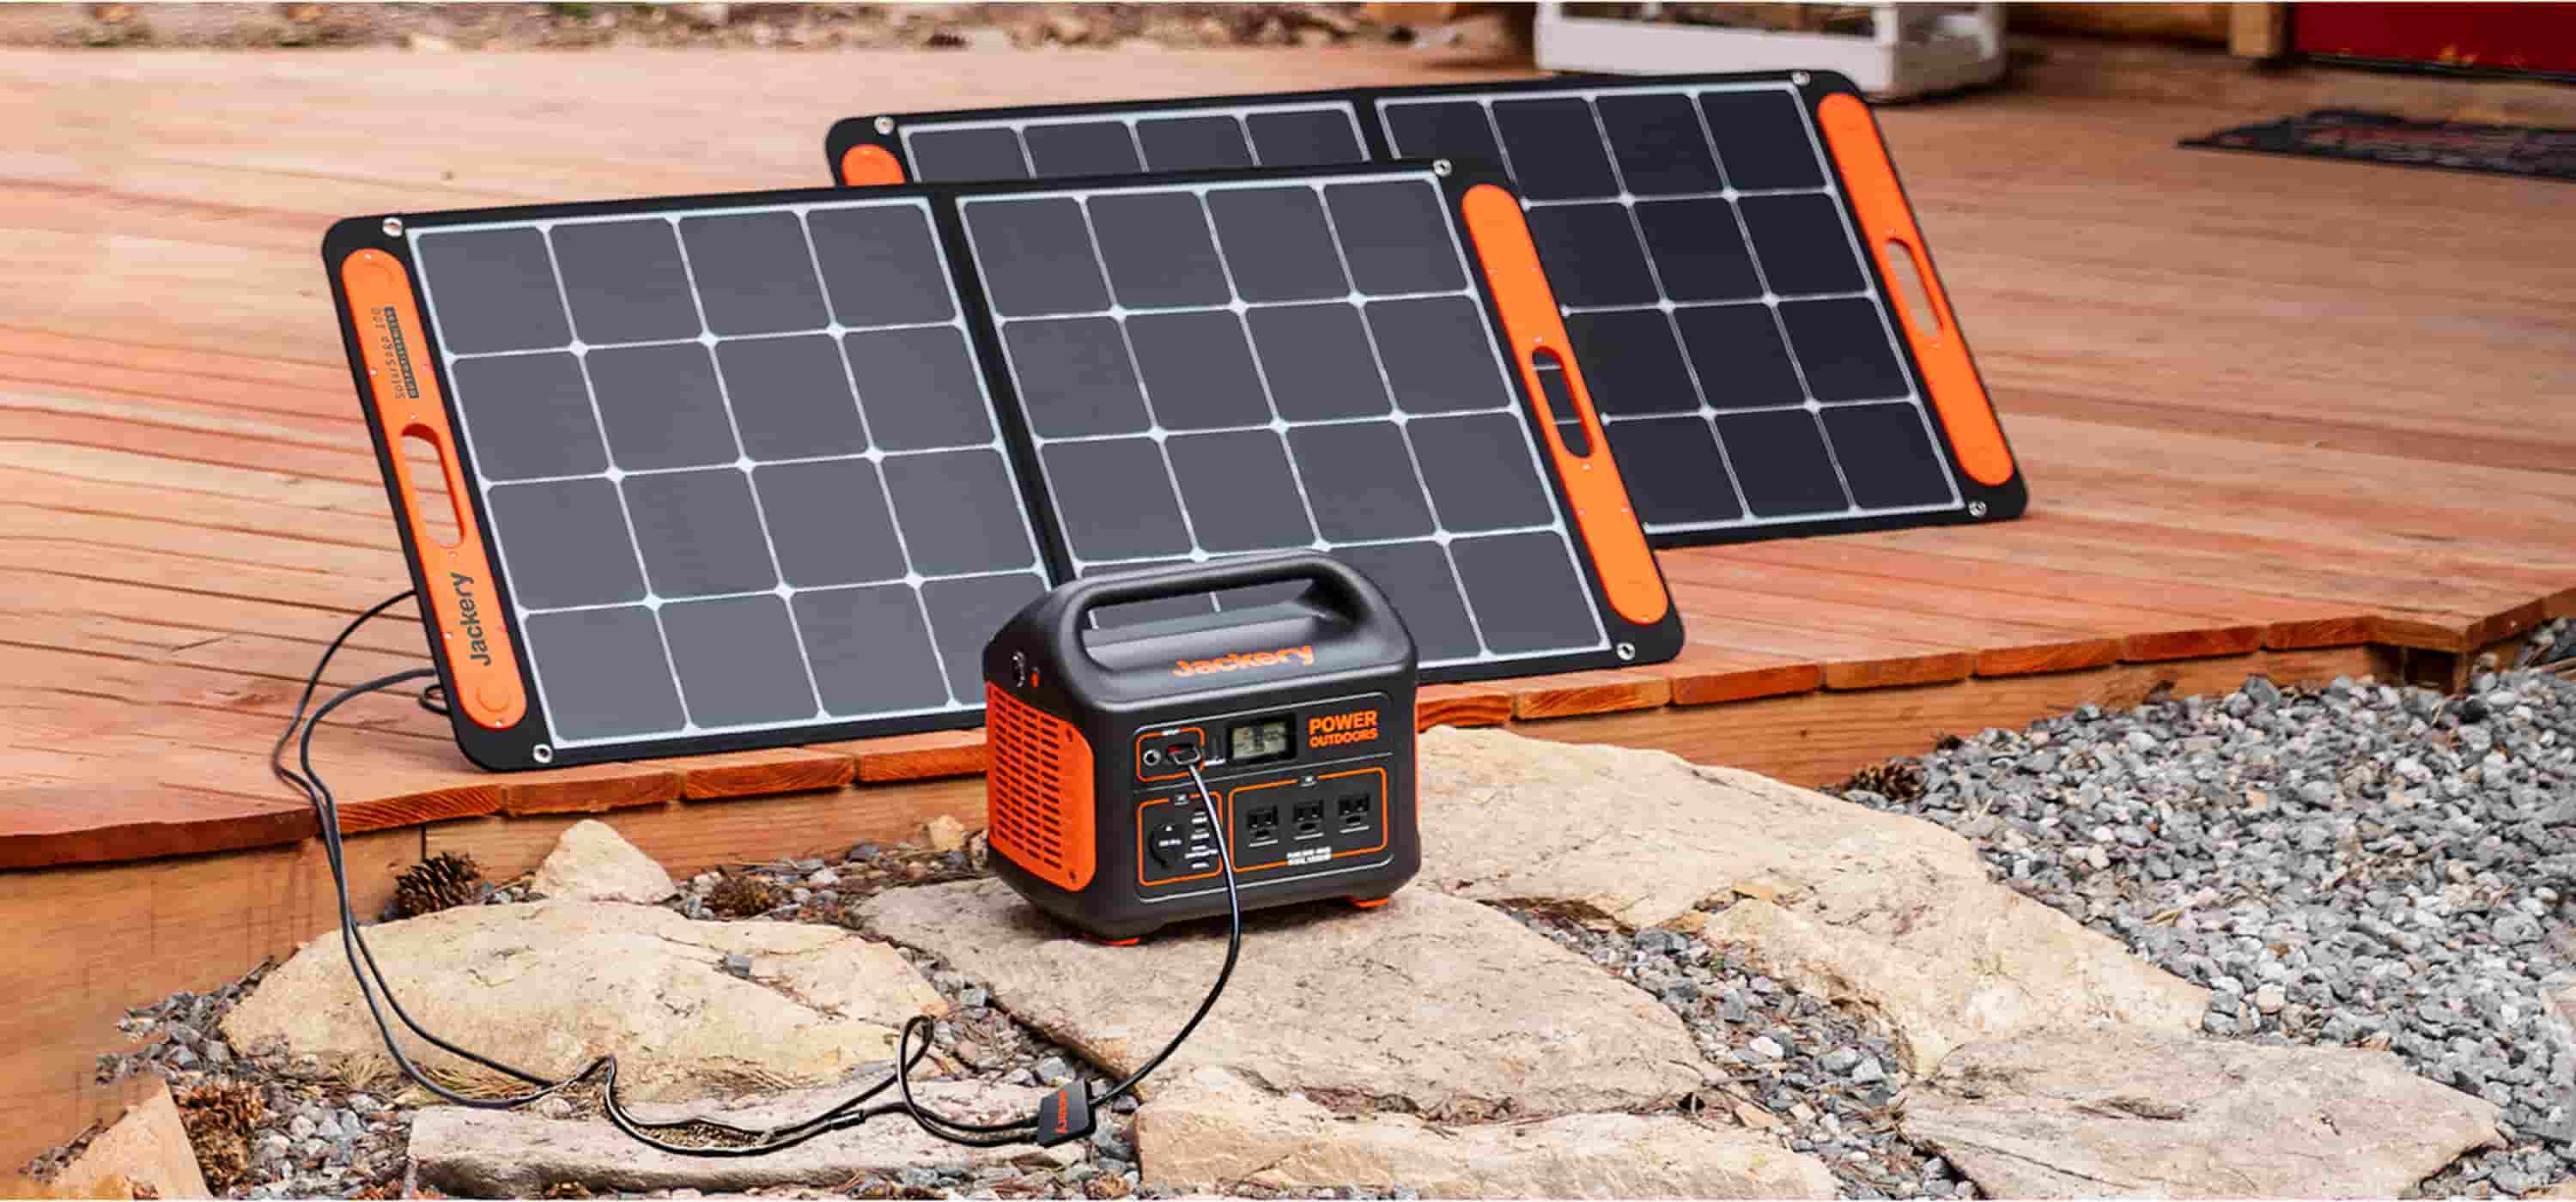 Electricity tension is over, buy Solar Power Generator with offers on Amazon